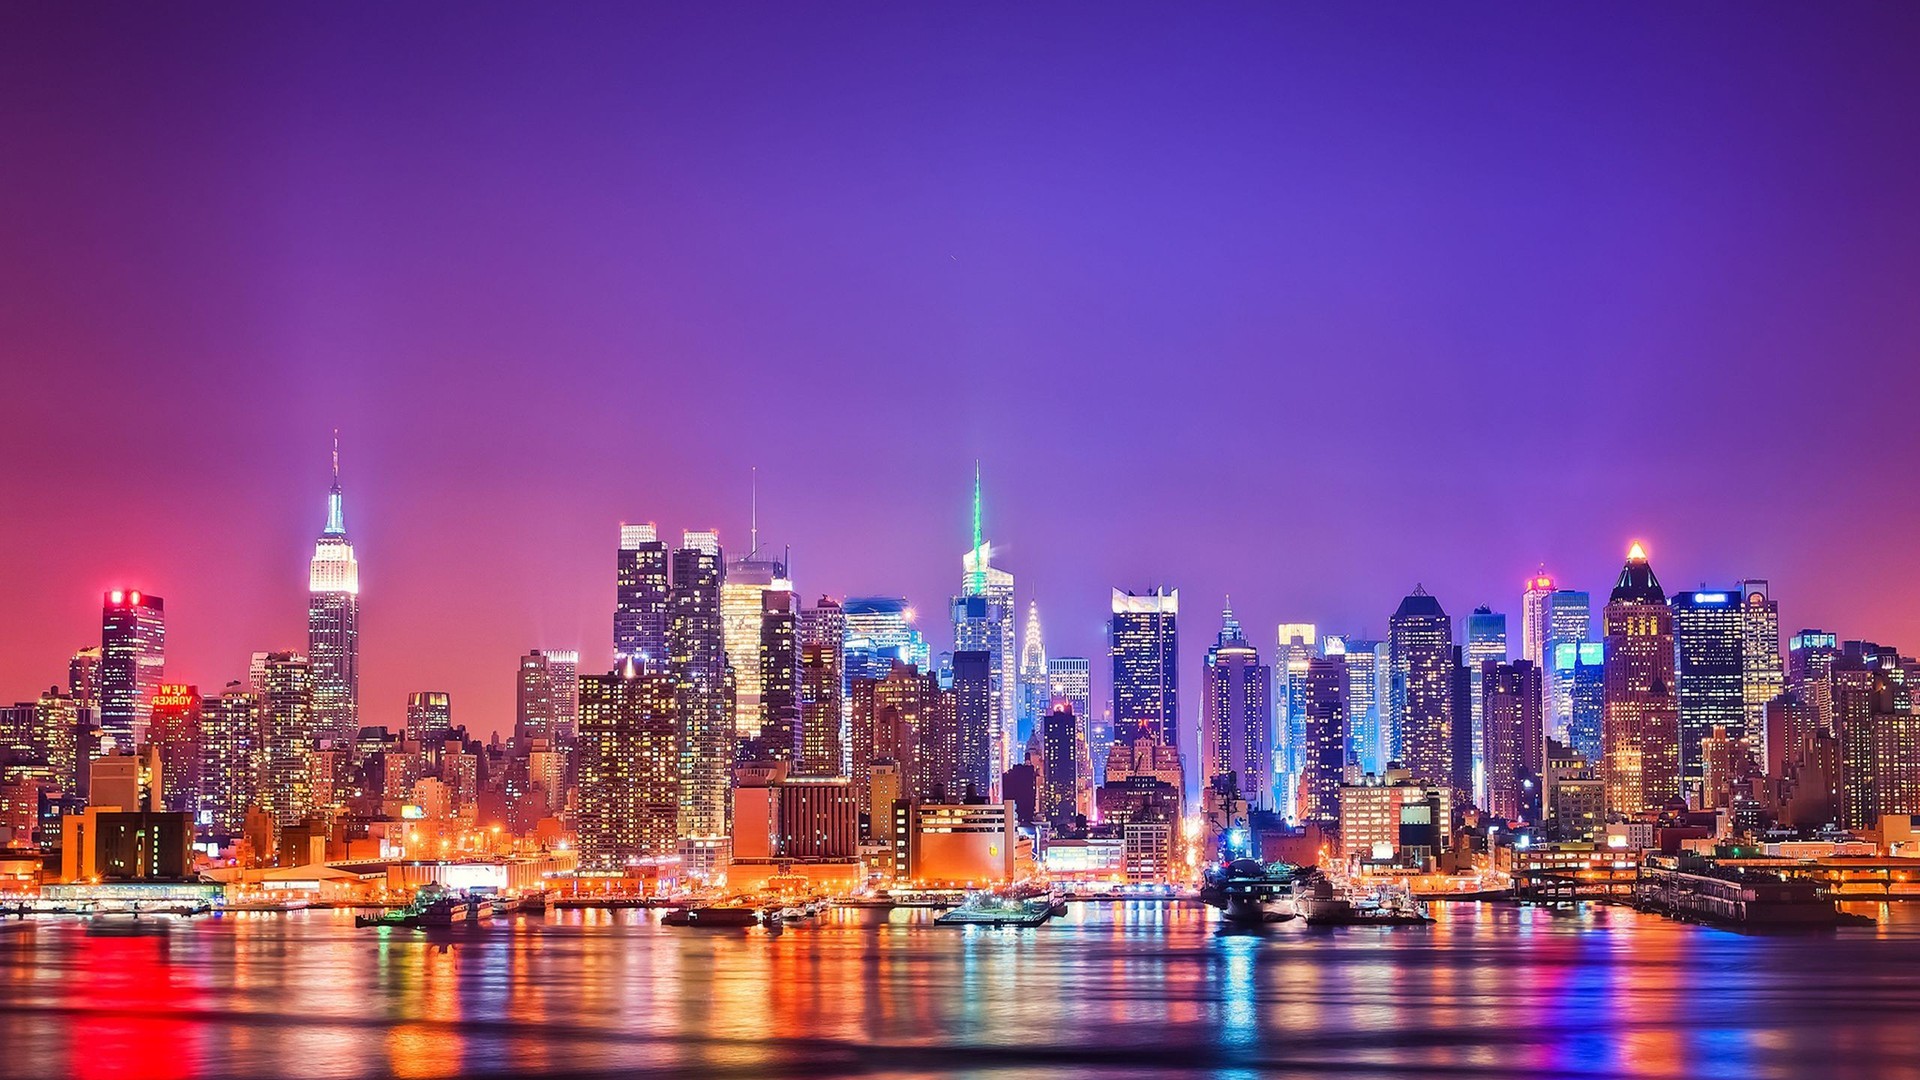 General 1920x1080 New York City night building city lights cityscape colorful sky USA